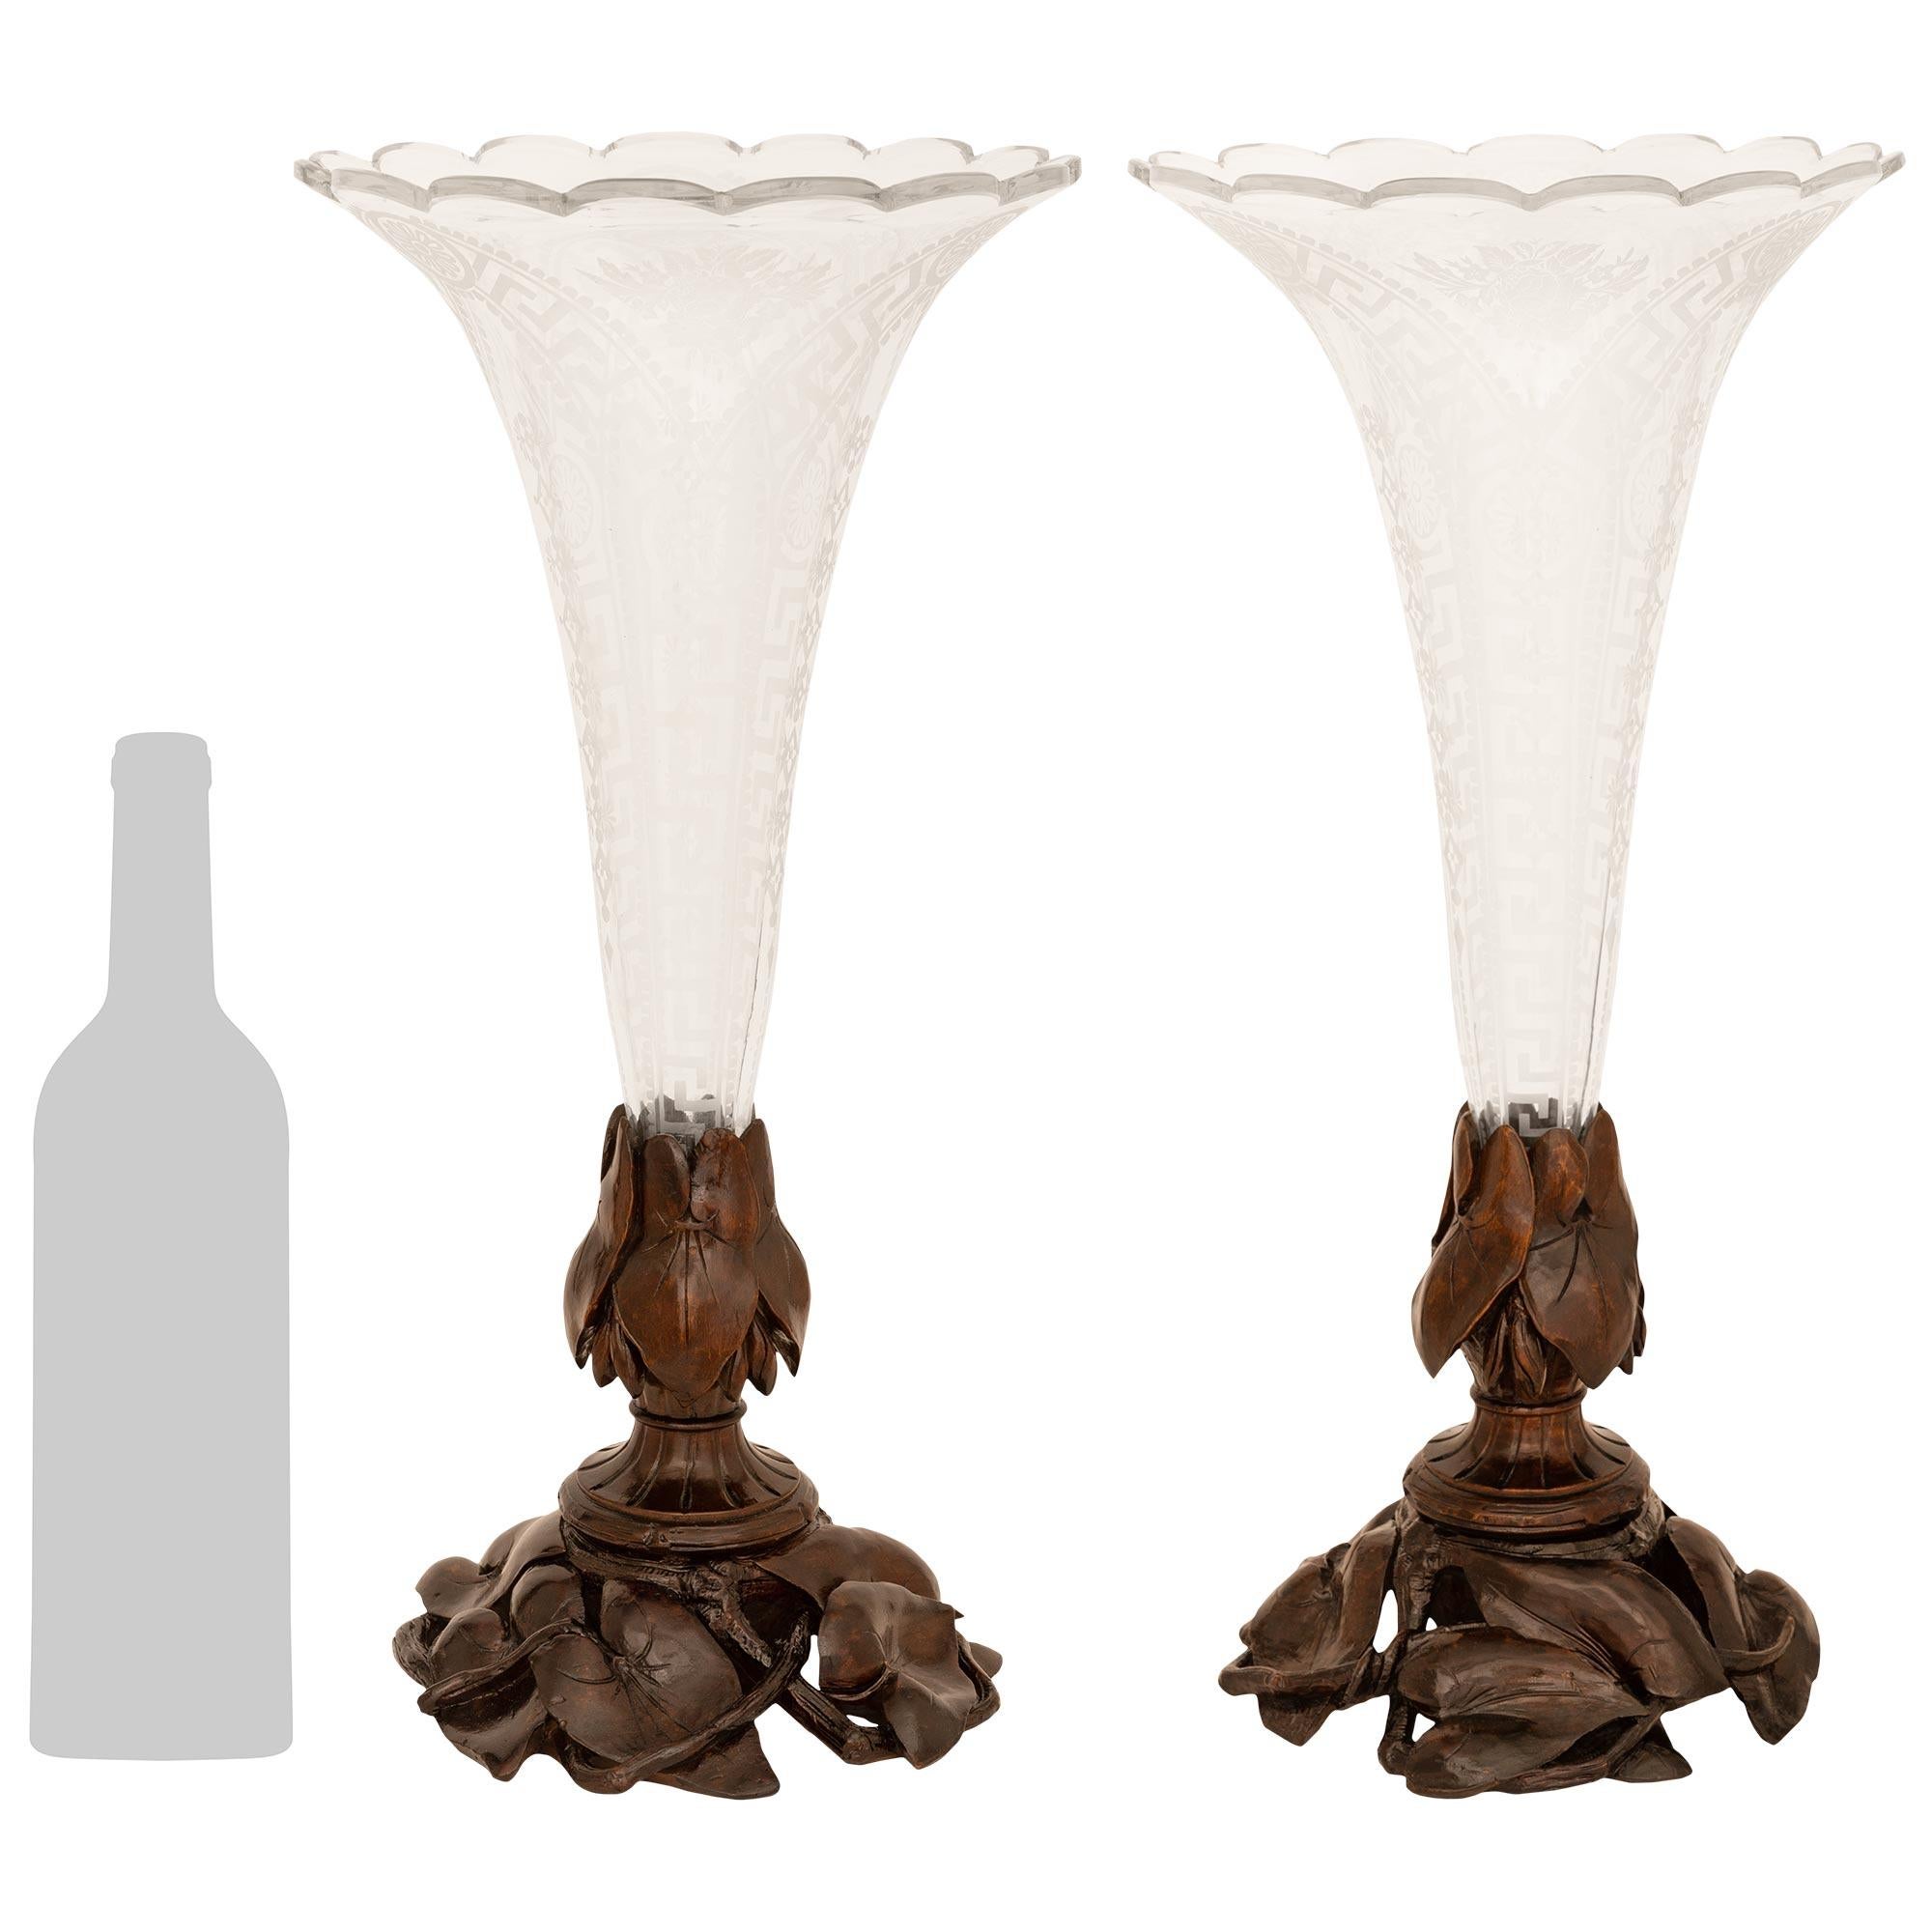 An elegant pair of German 19th century Black Forest st. etched Glass and Walnut vases. Each beautiful vase is raised on a wonderful array of Walnut water flora below a fluted socle shaped support with additional foliage wrapped around the base of